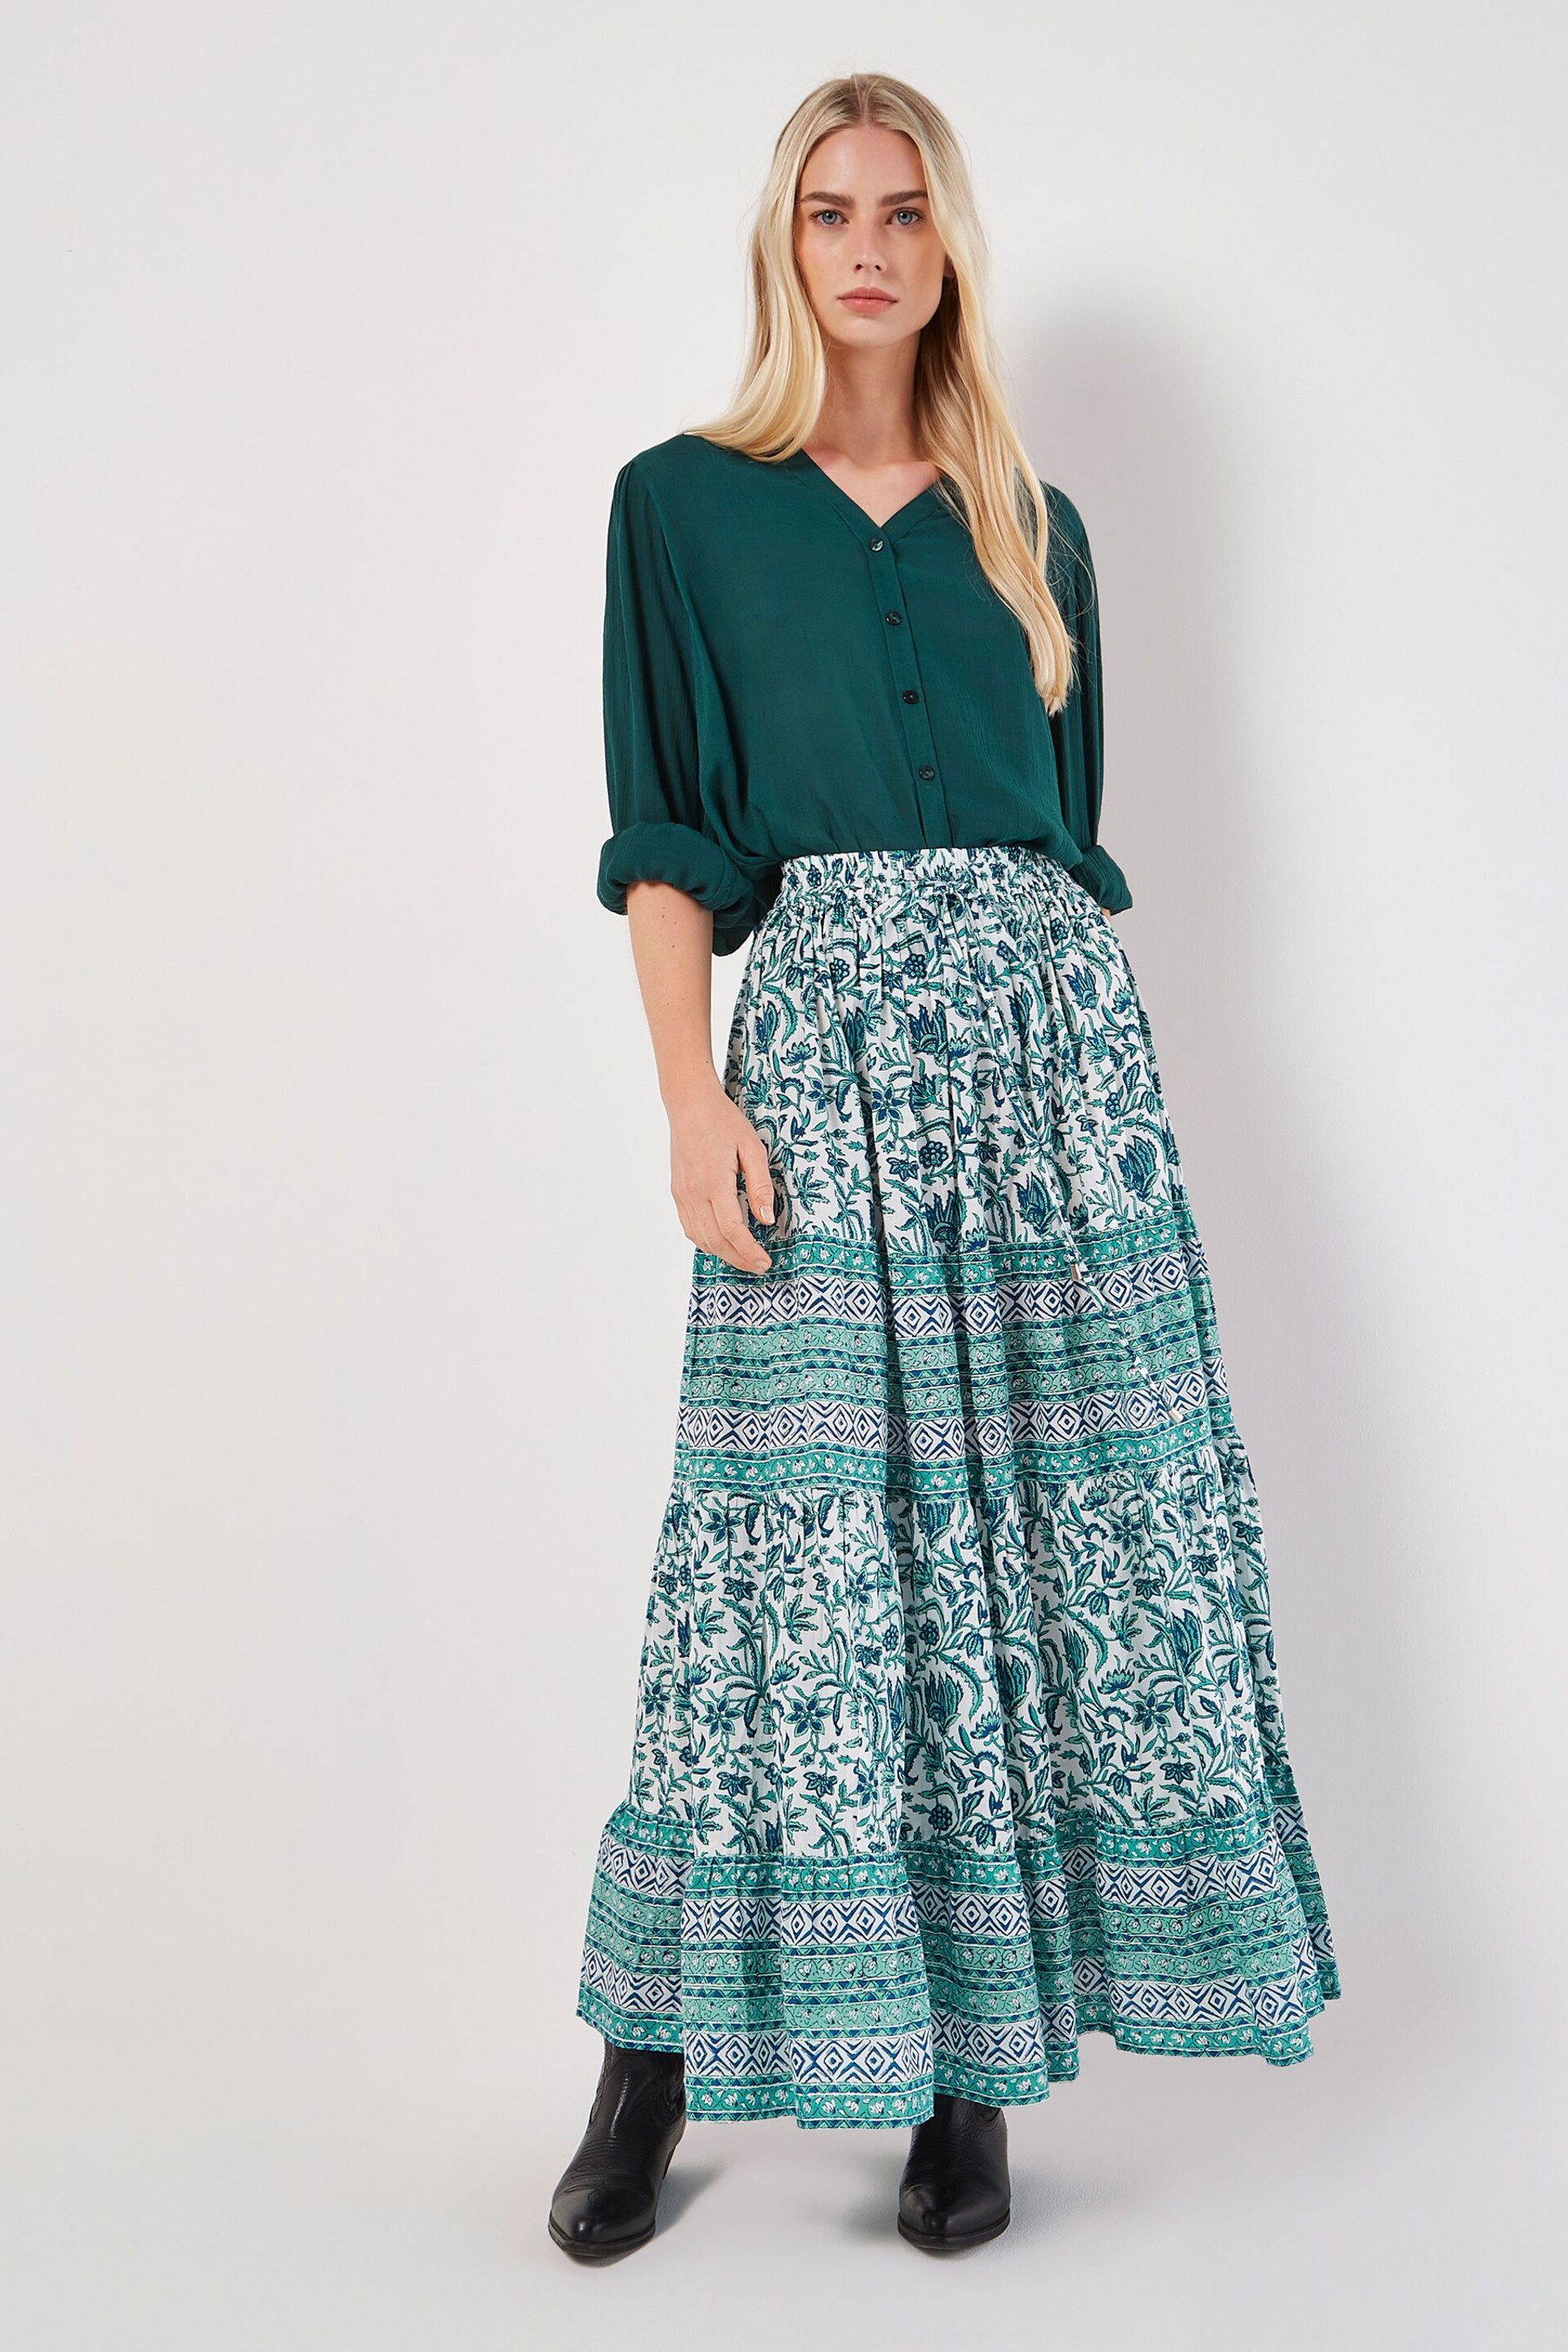 Apricot Cream Floral Vine Cotton Tiered Maxi Skirt - Image 5 of 5